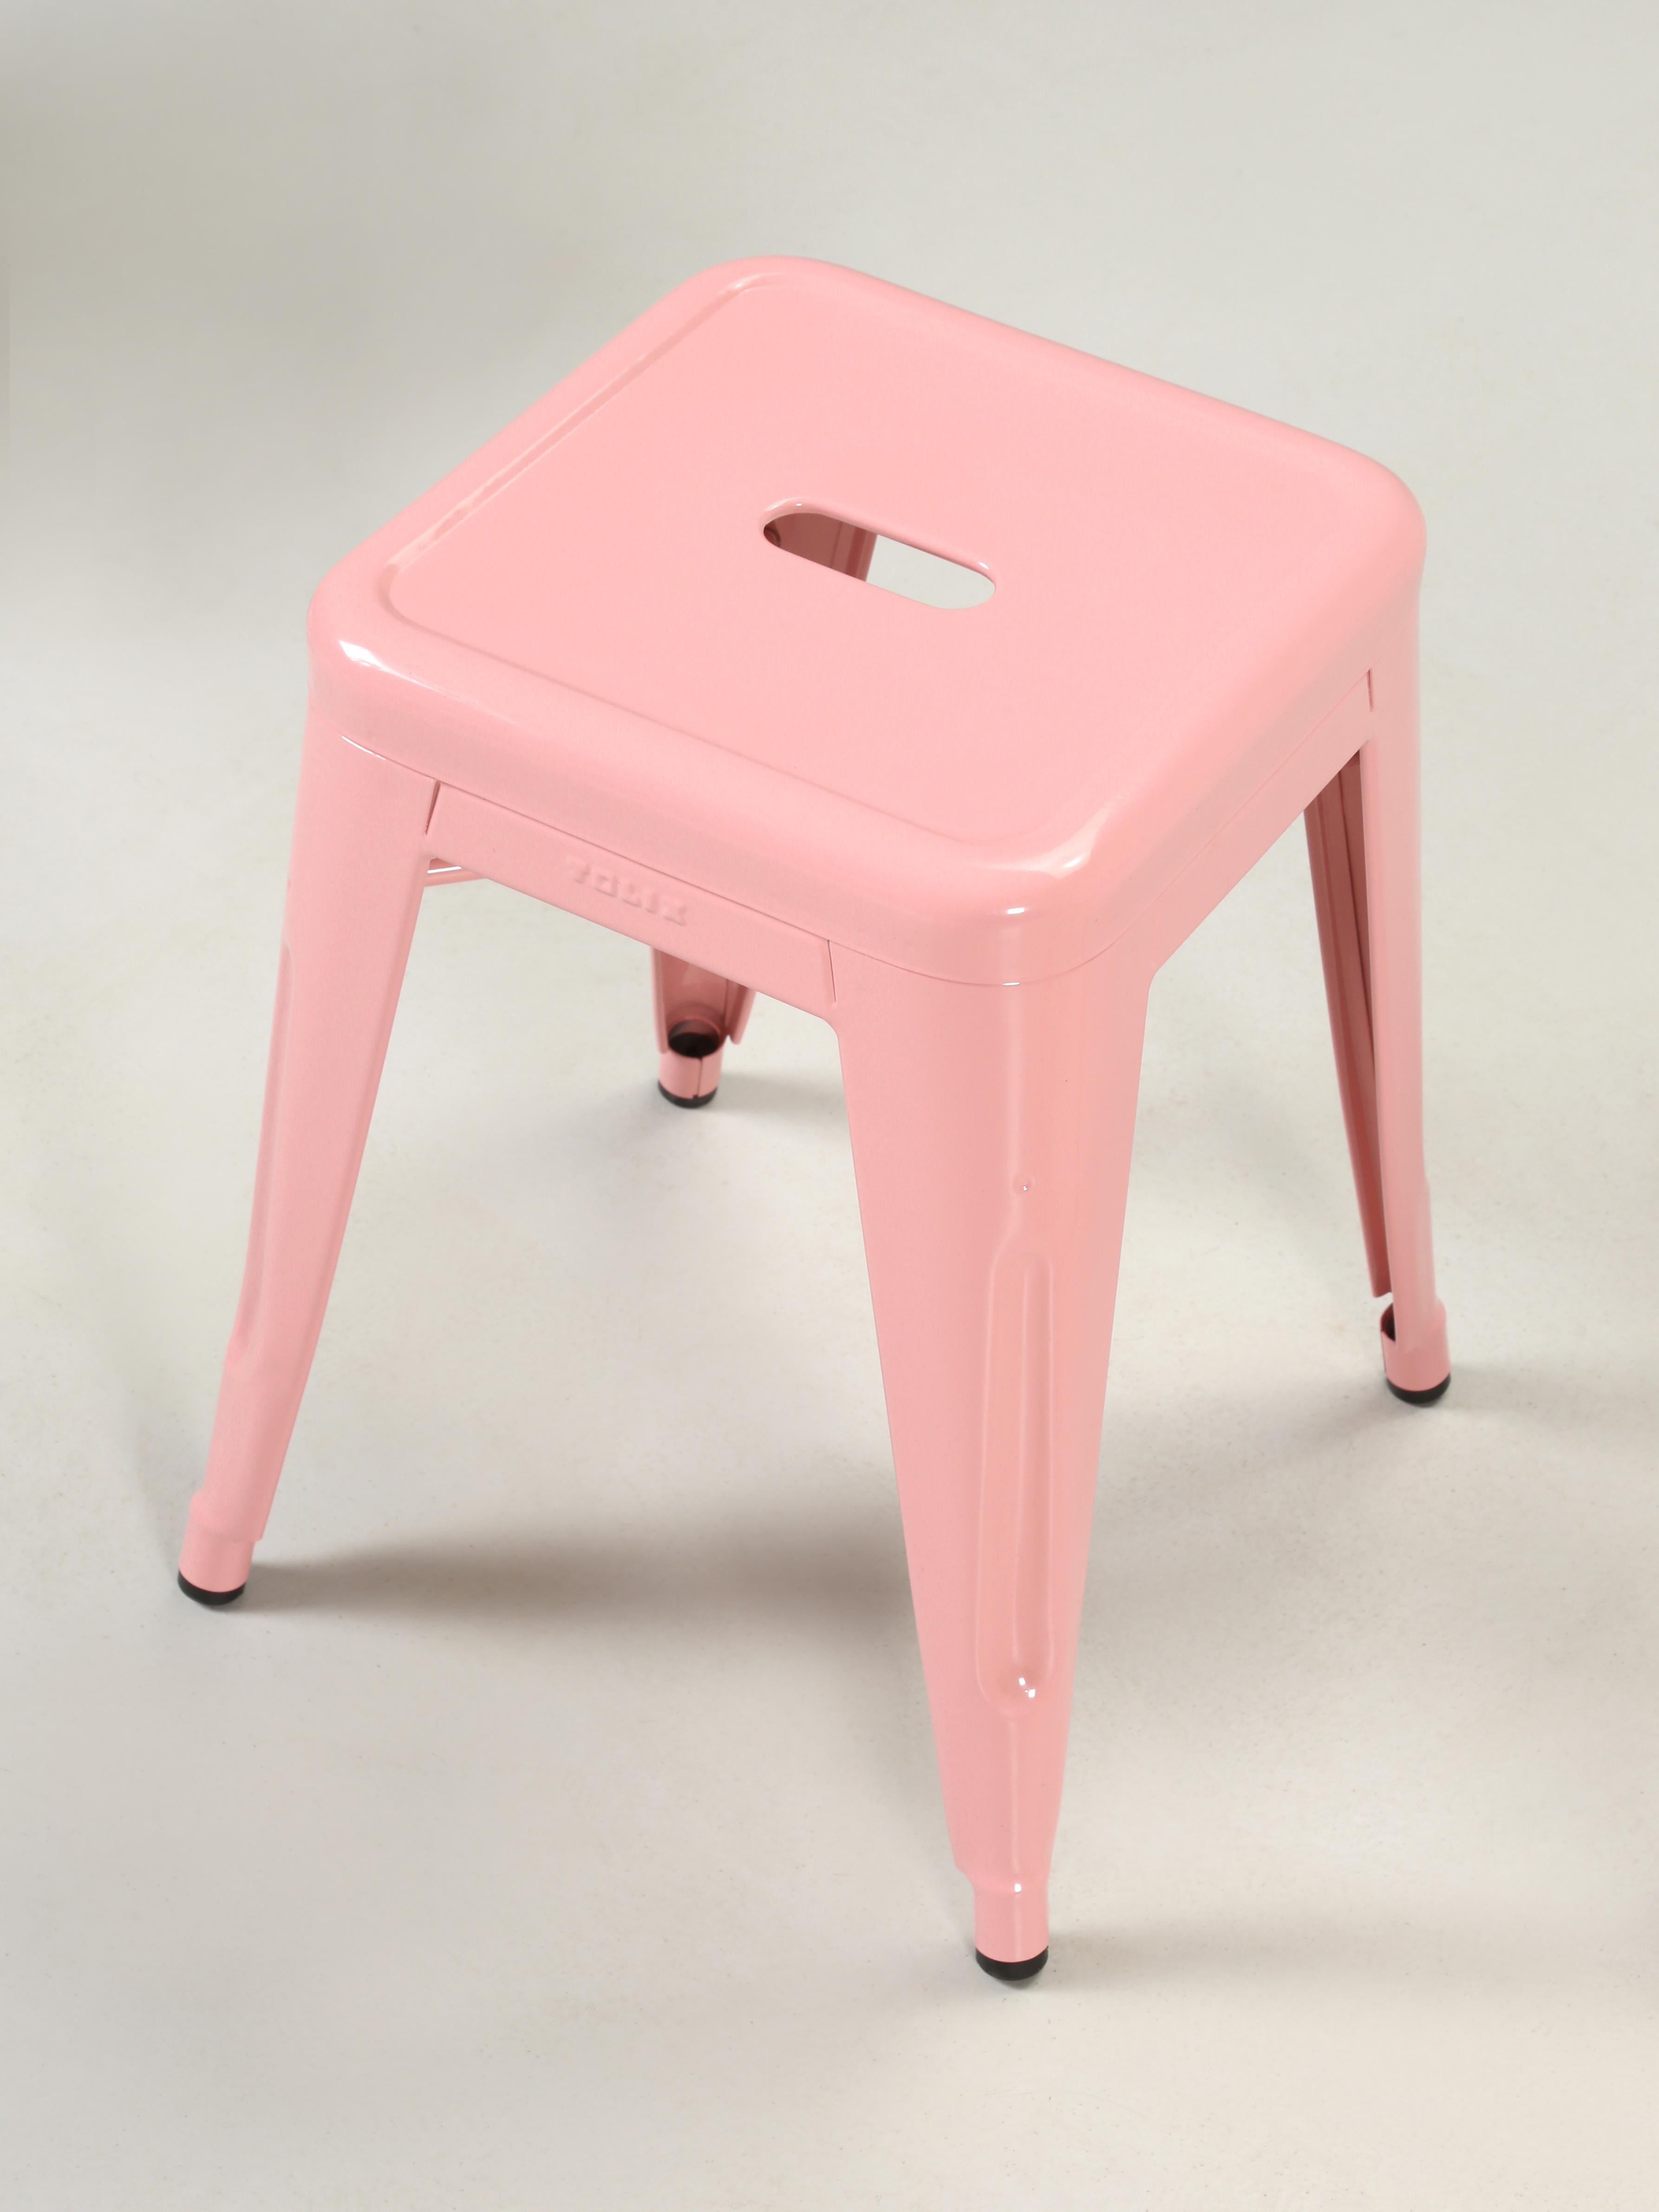 “Real” hand-made in France, authentic Tolix Steel Stacking Stools in Pale Pink. We have amassed a collection of over (1000) pieces of genuine Tolix steel stacking Chairs, Counter Stools and Bar Height Stools as well as Tolix Steel Tables. Most of